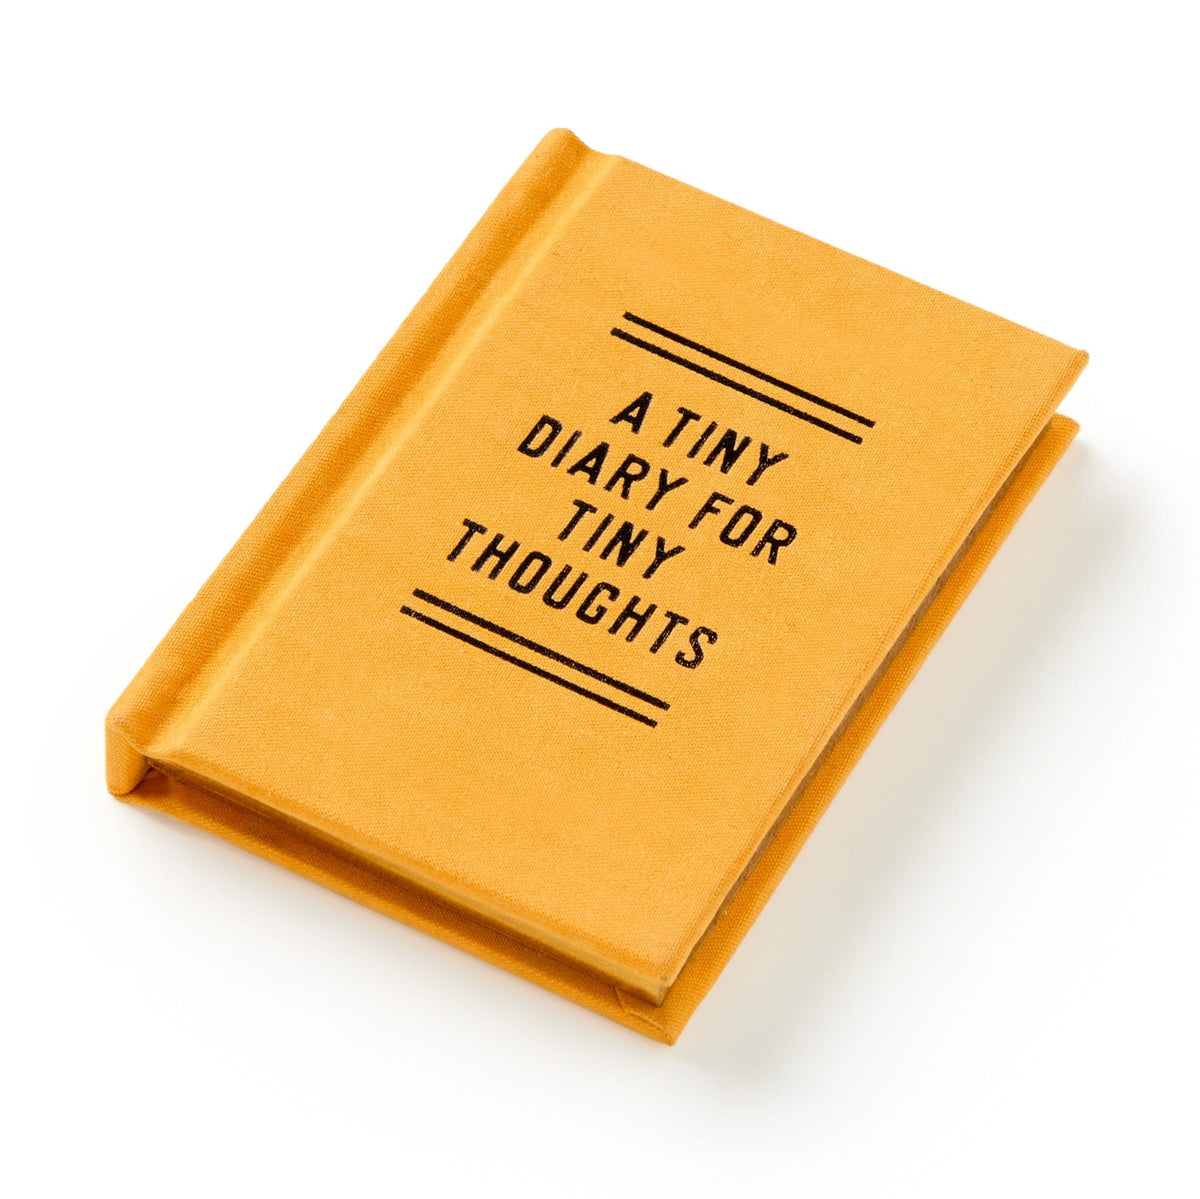 A Tiny Diary for Tiny Thoughts - Brass Monkey - 9780735381094